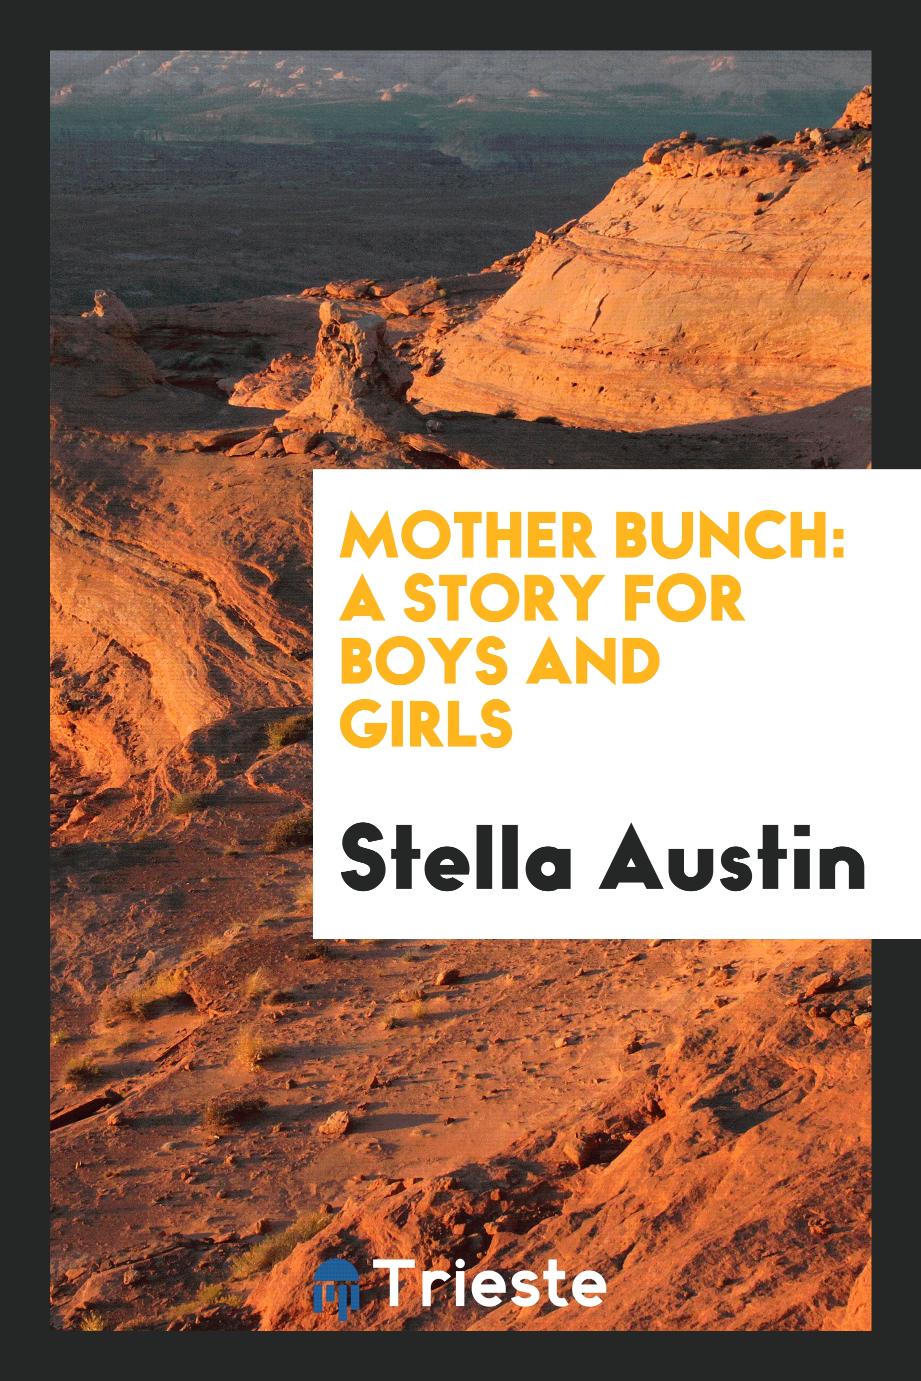 Mother Bunch: a story for boys and girls